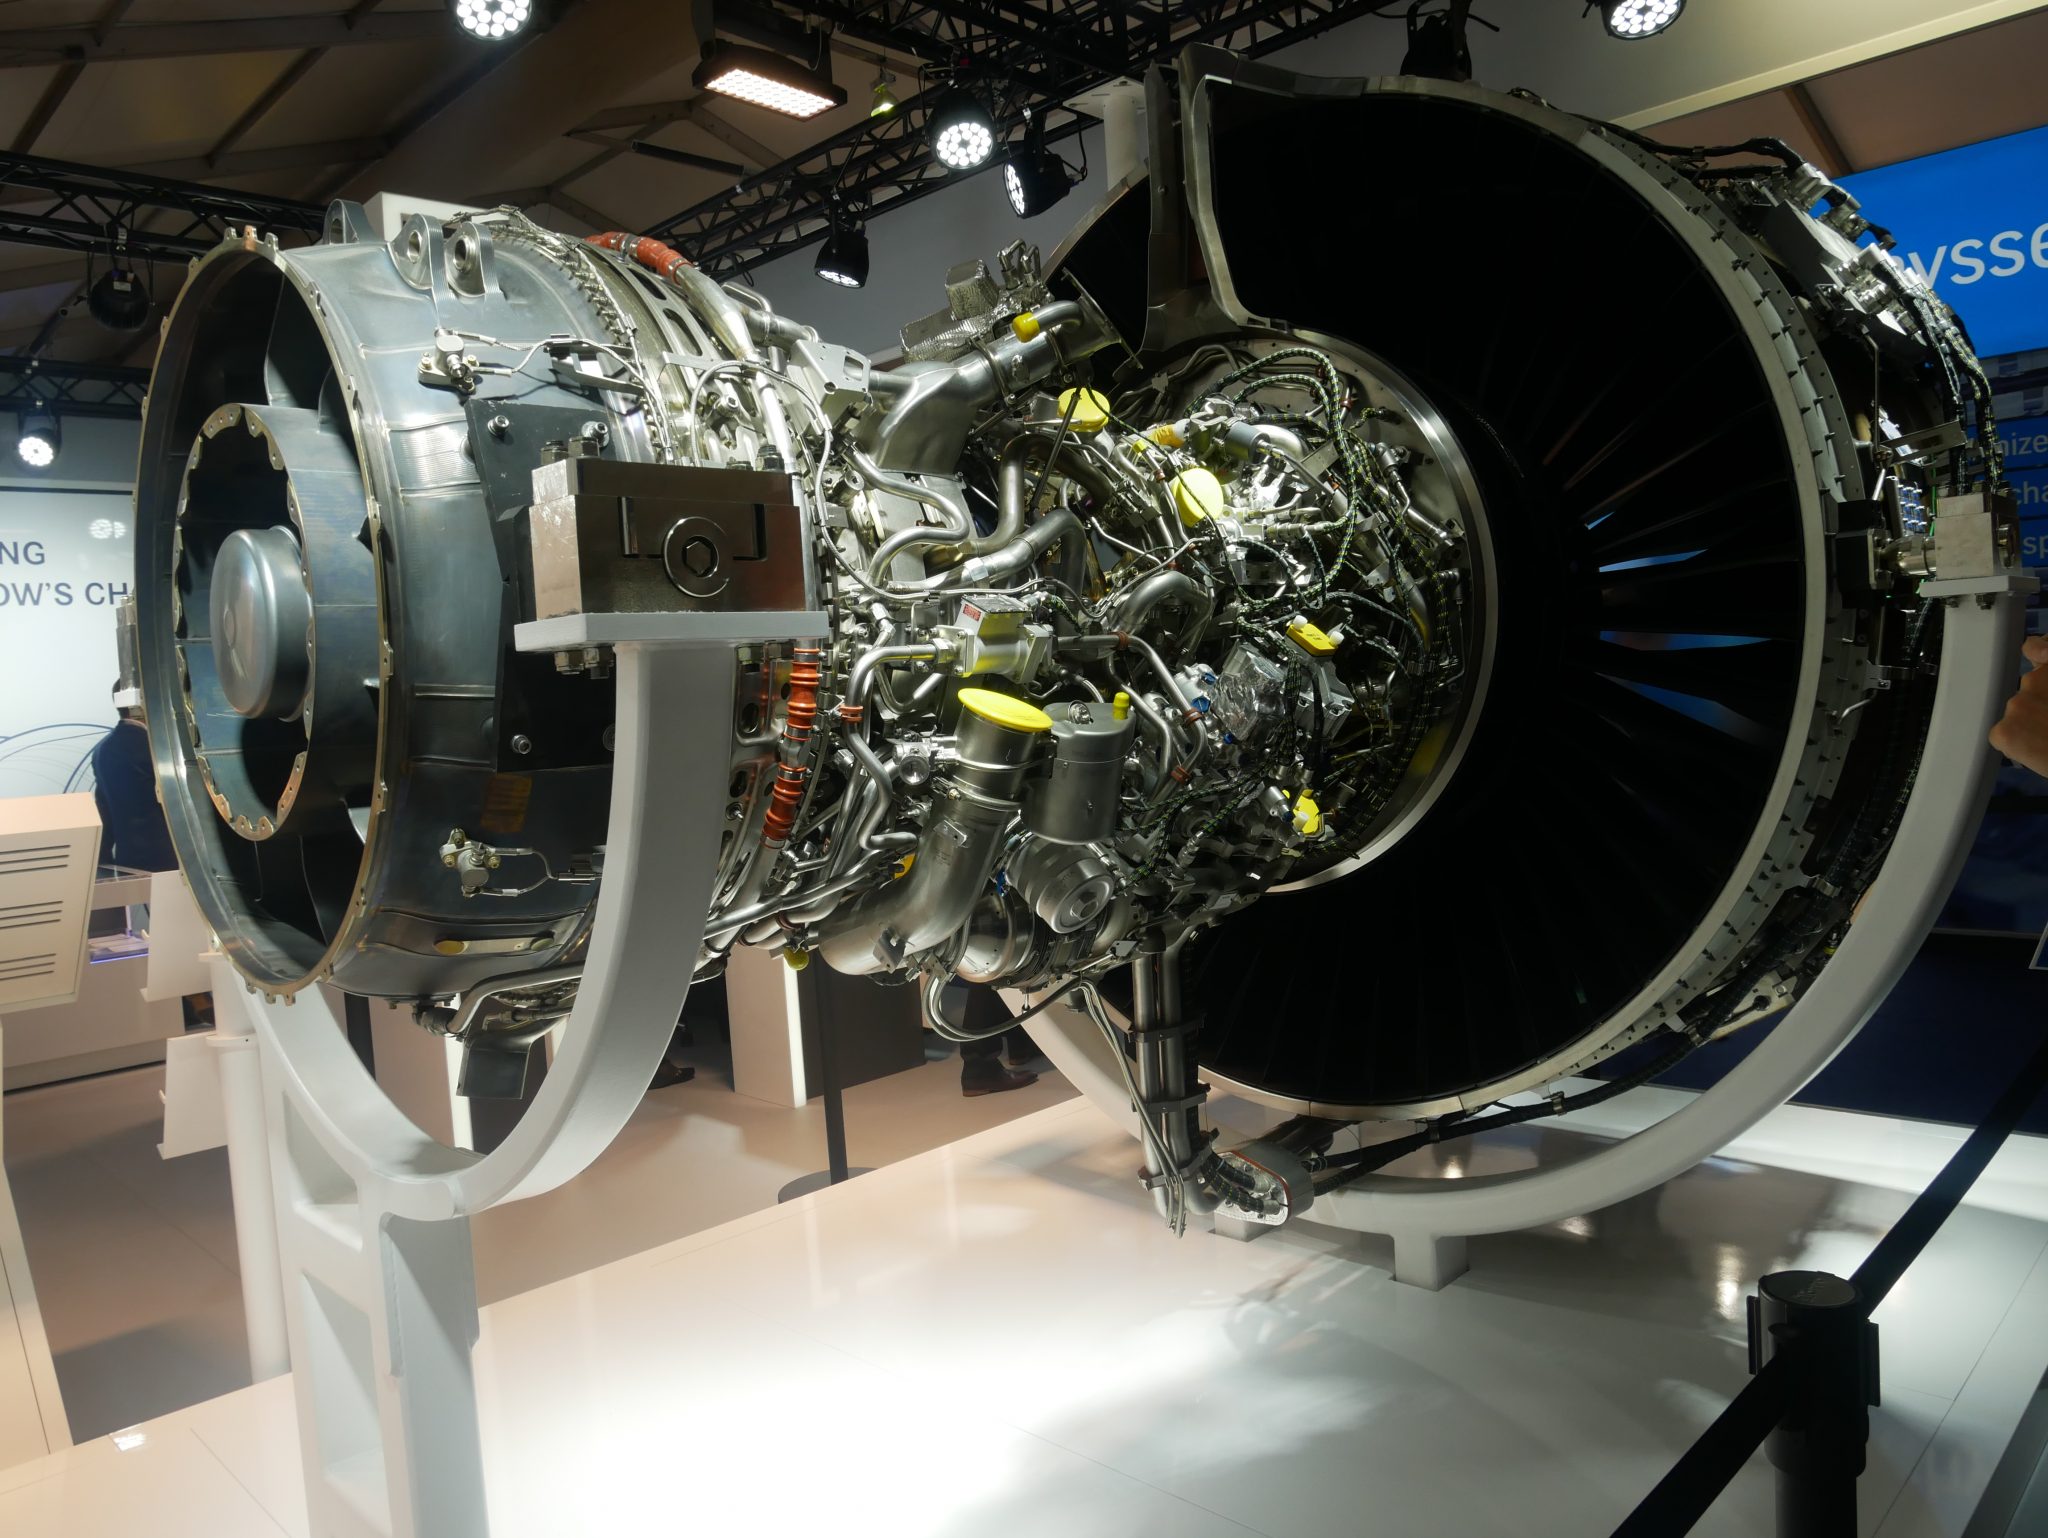 The Pratt & Whitney Geared Turbofan PW1000G aircraft engine, complete with additively manufactured components. Photo via Tia Vialva.